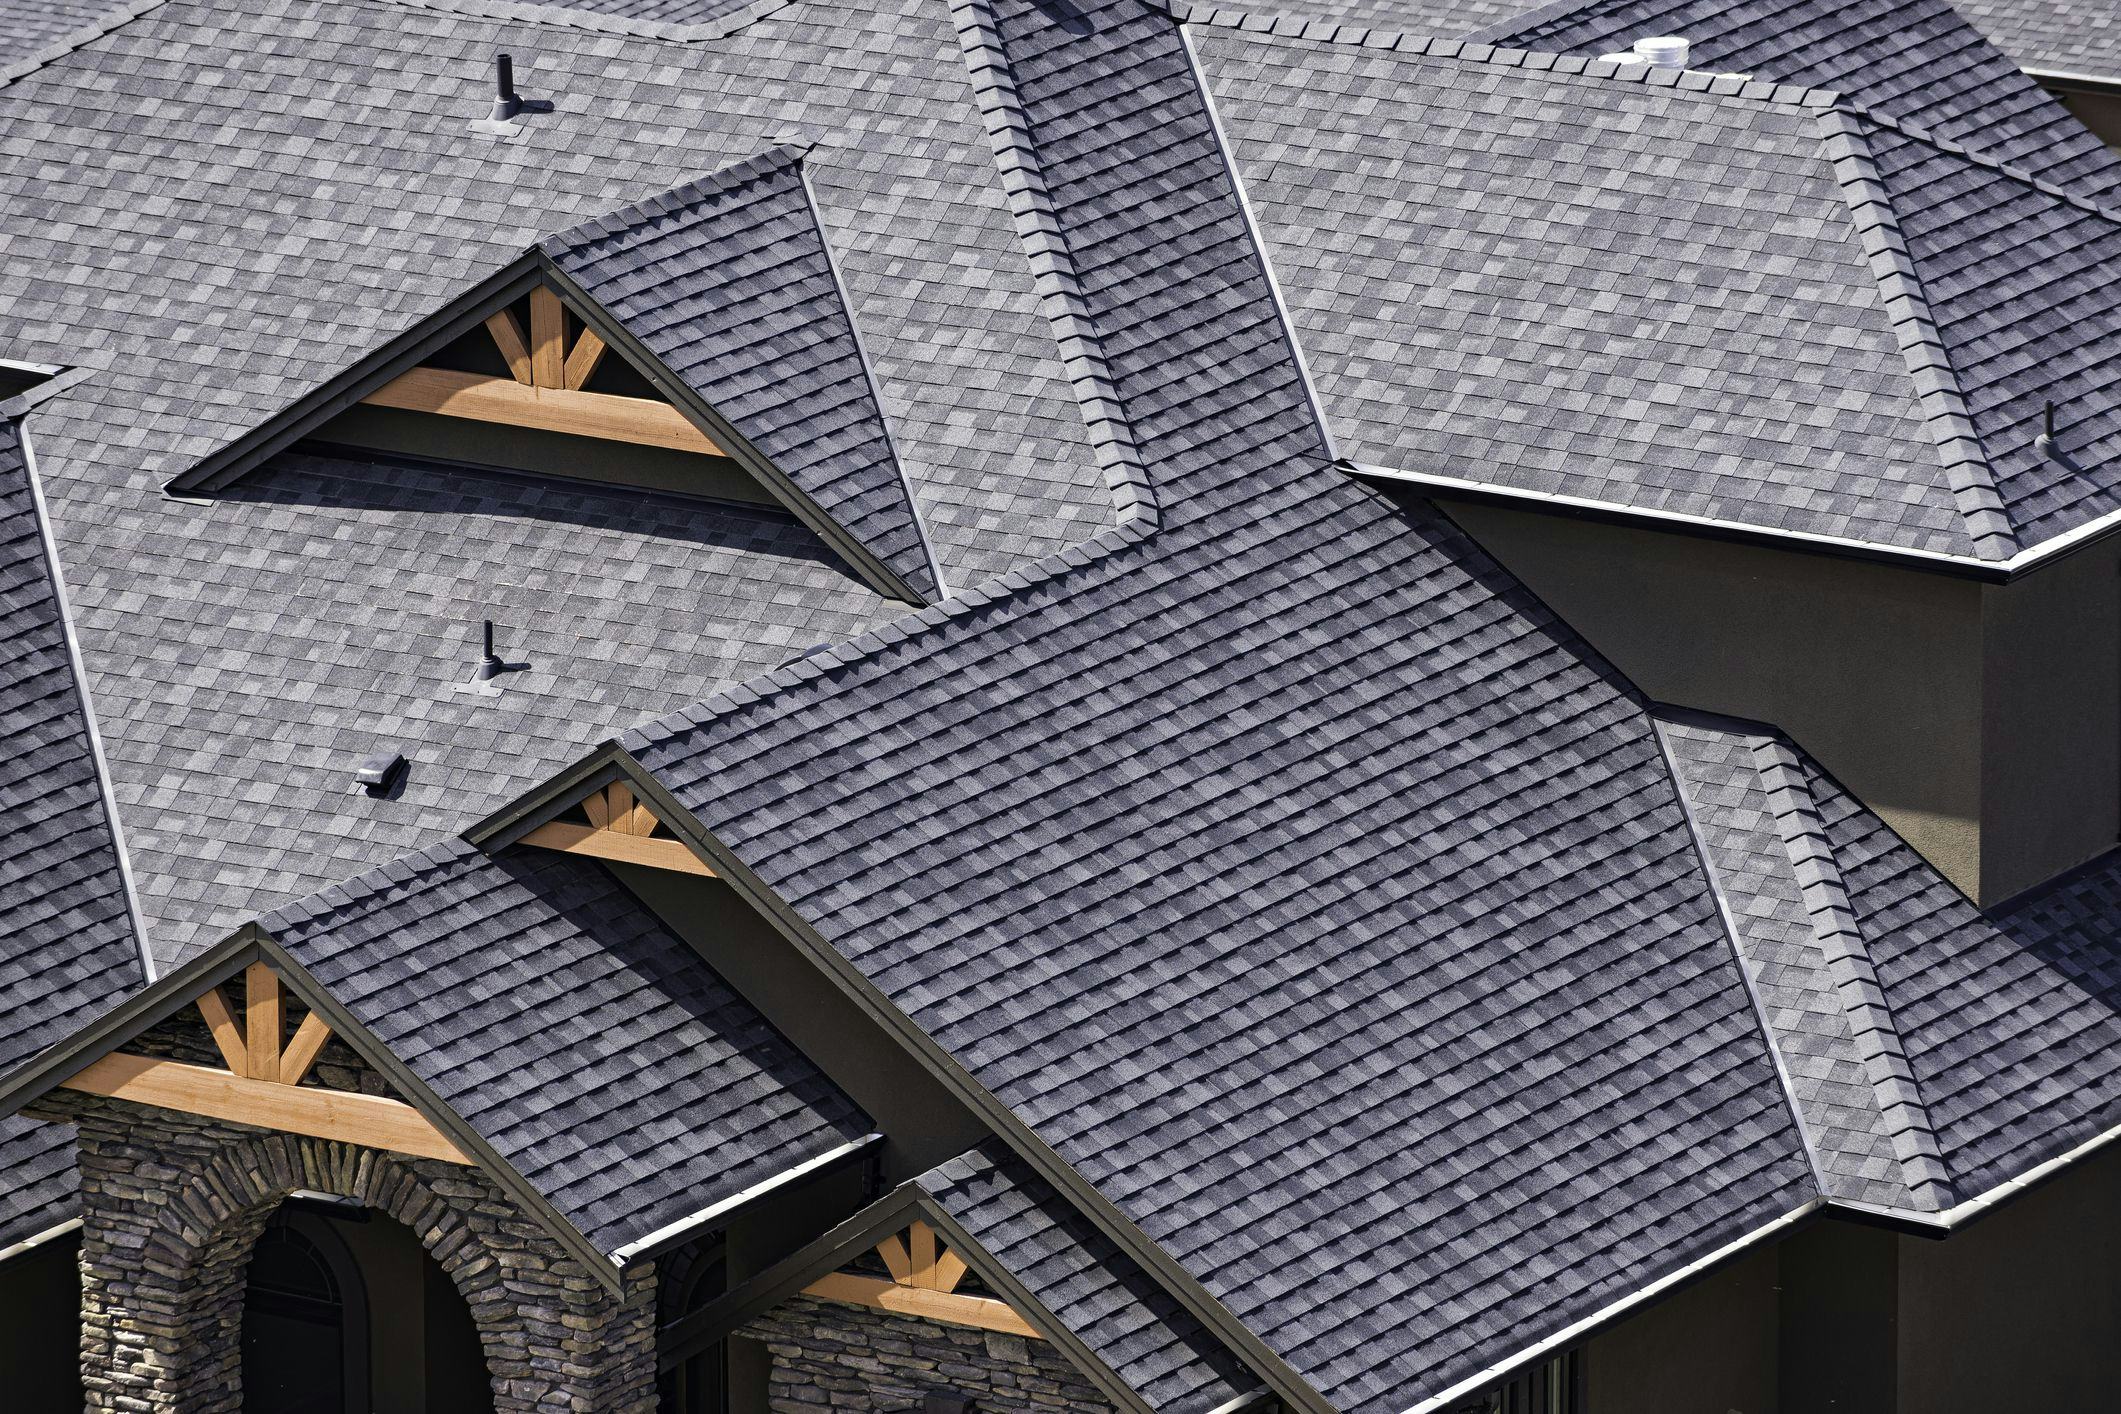 Roofing Installation, Roofing Repair and Roof Replacement Service in Waukesha, WI